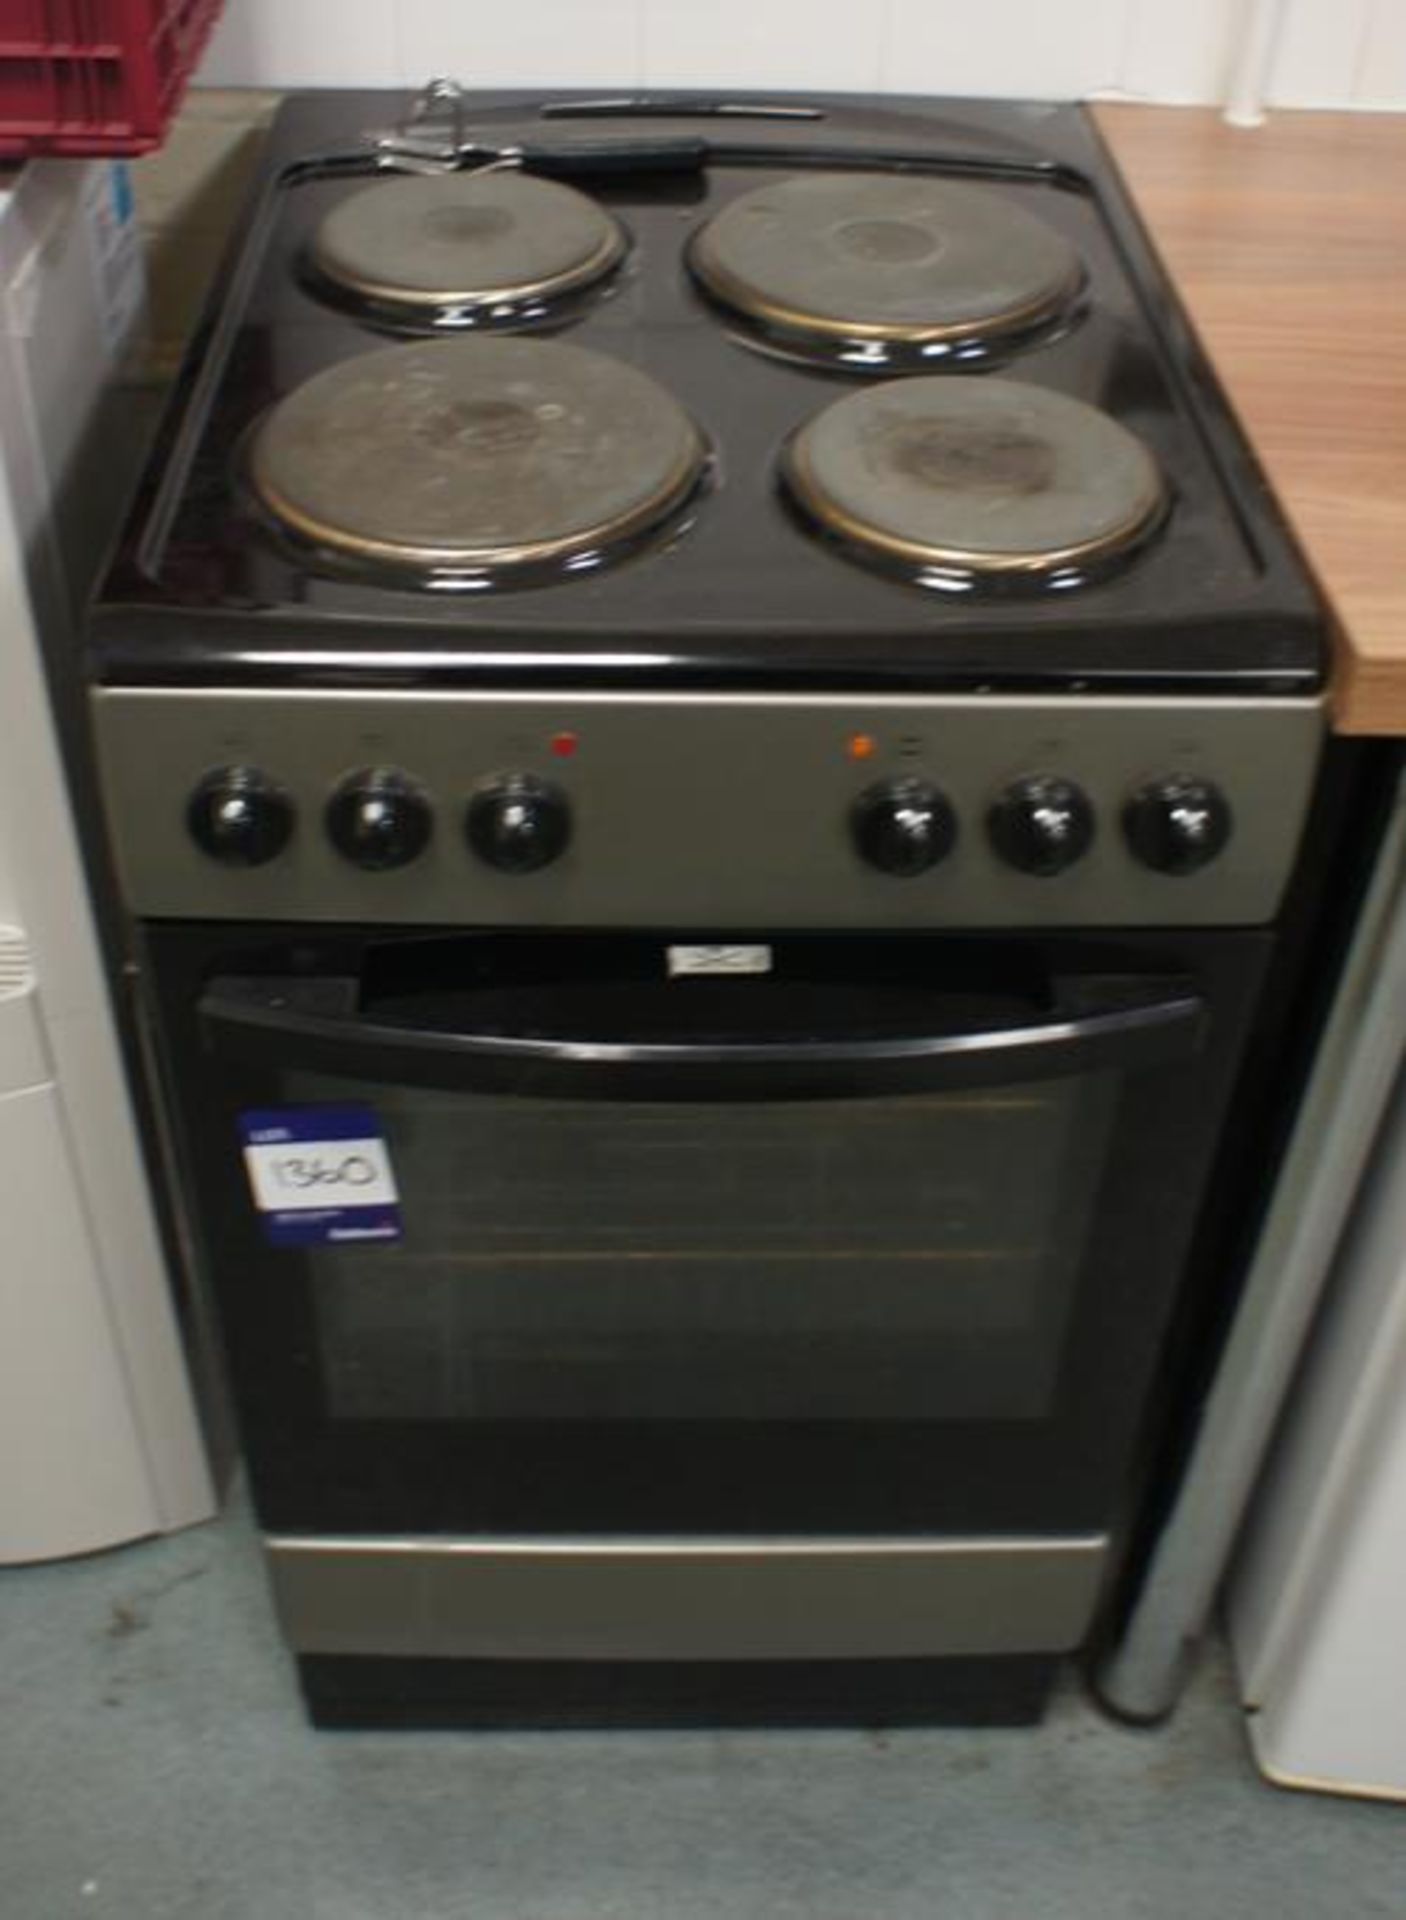 * CFSESV14 Freestanding Electric Oven with Hob Photographs are provided for example purposes only - Image 3 of 3